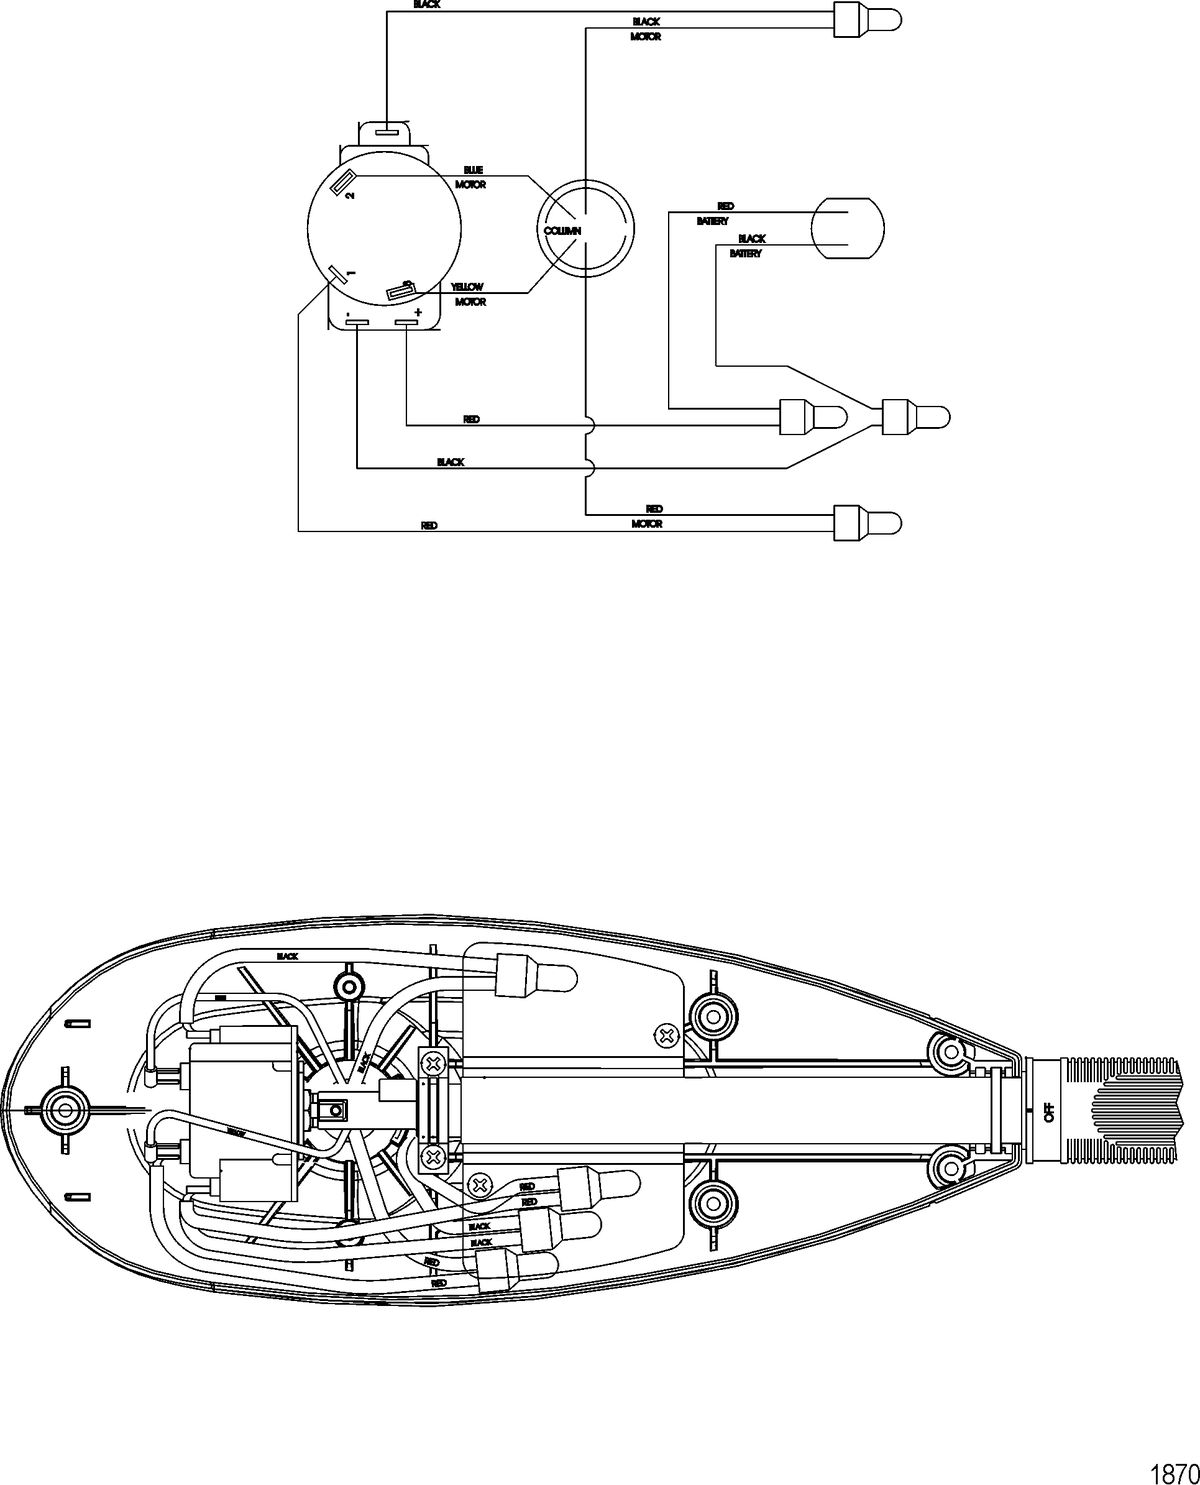 TROLLING MOTOR MOTORGUIDE SALT WATER SERIES Wire Diagram(Model SW54HB) (Without Quick Connect)